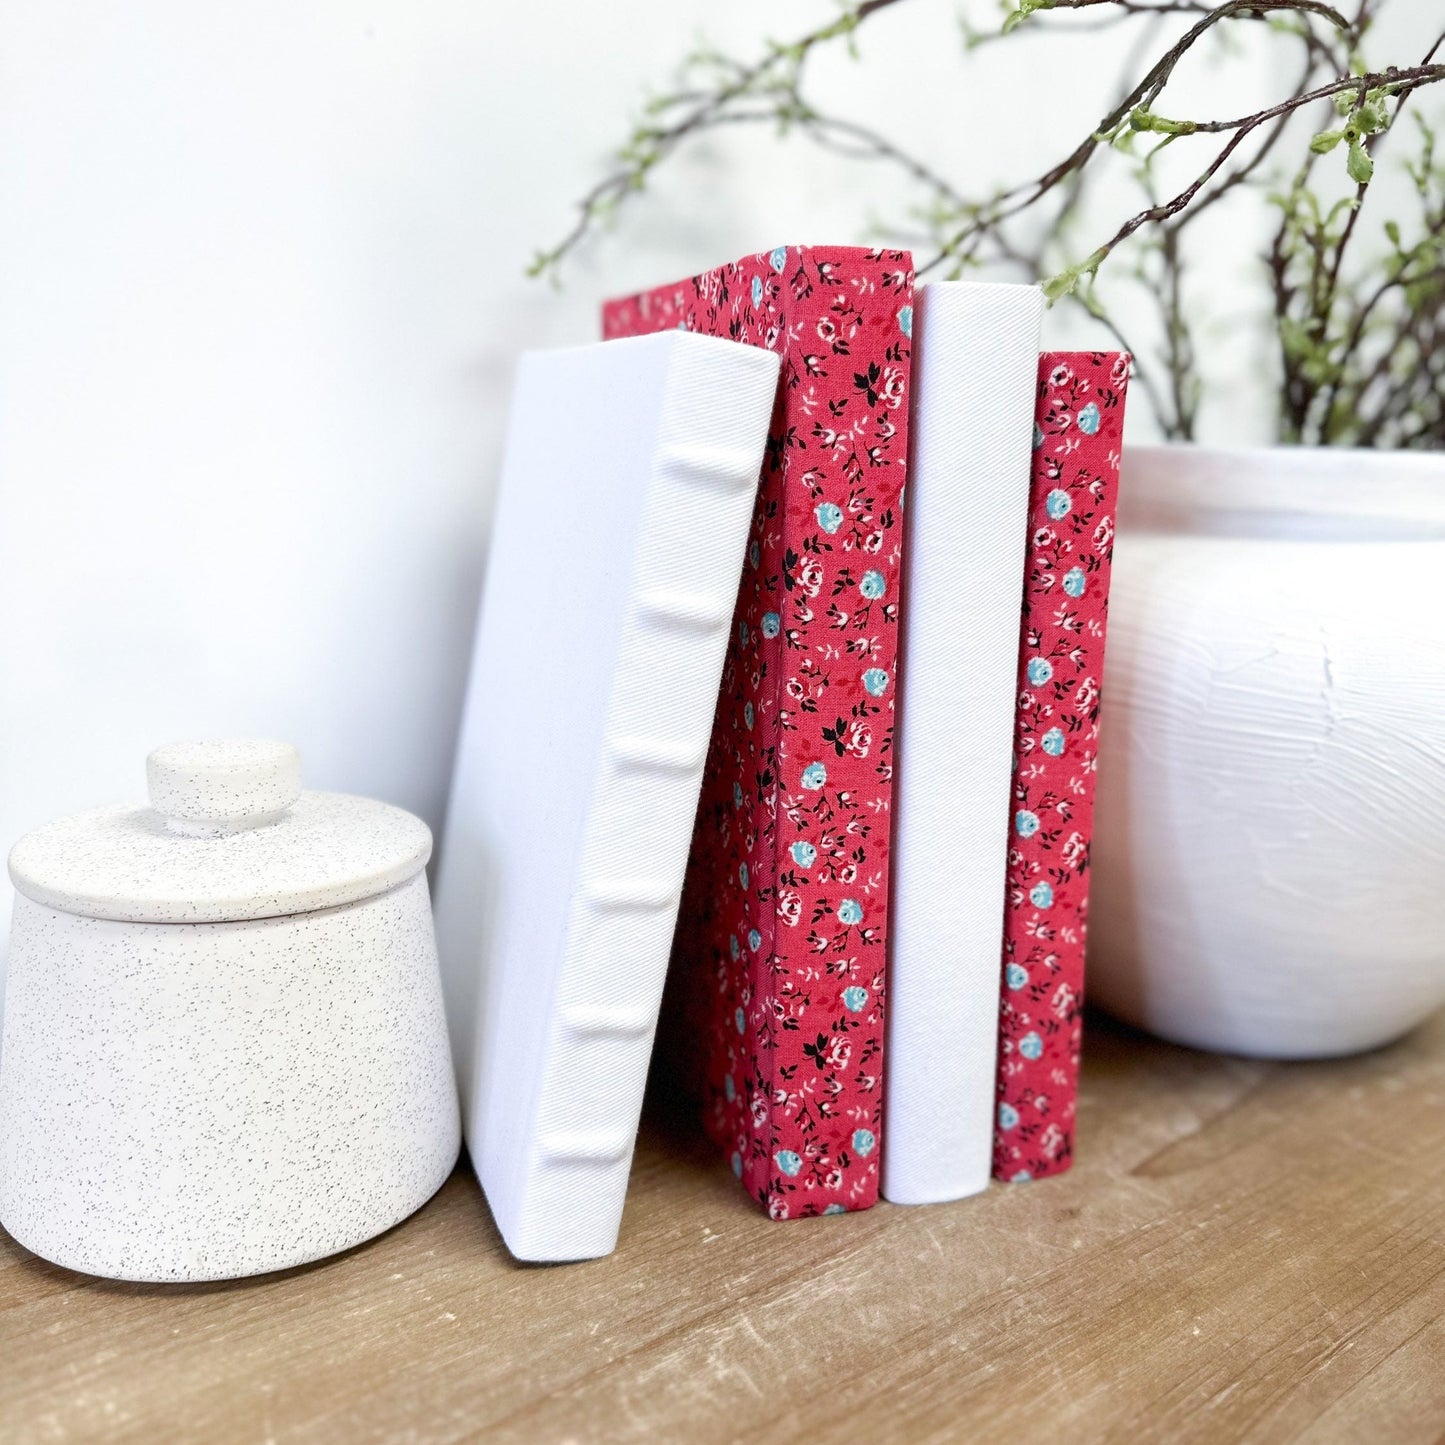 Books by Color, Fabric Covered Books, Farmhouse Style, Red Home Decor